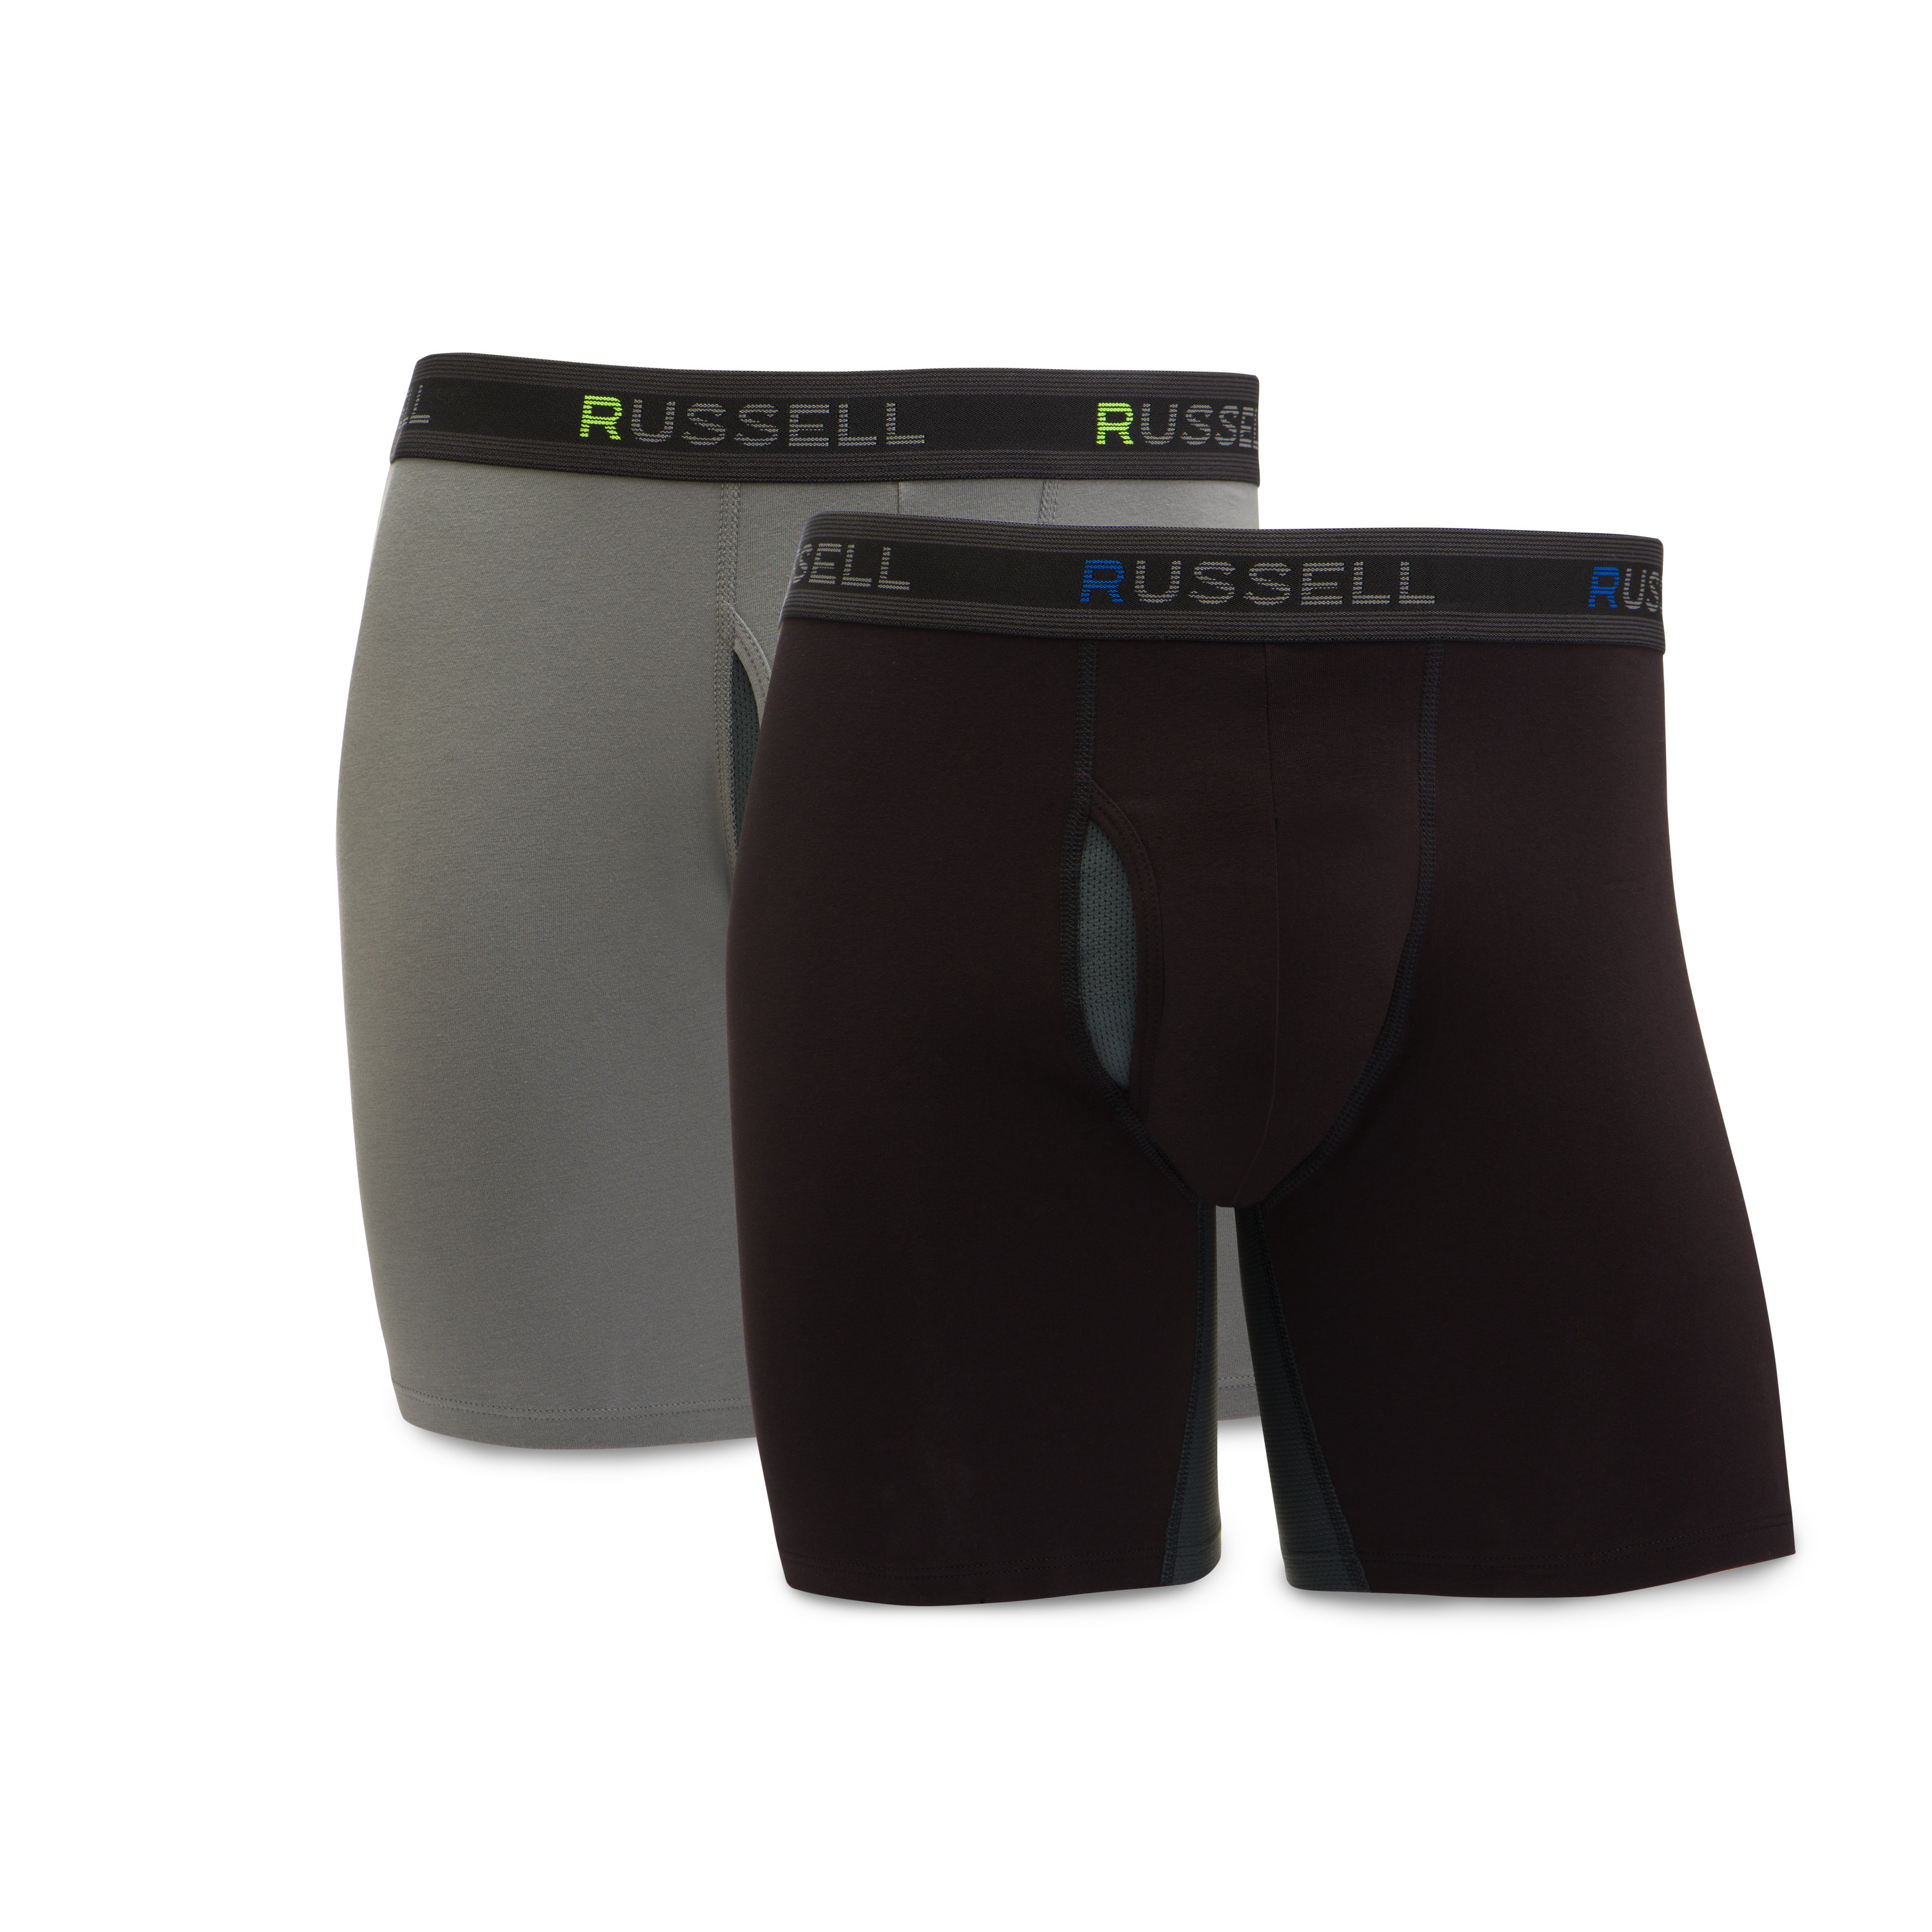 Russell Athletic Men's Performance Mesh Boxer Brief Underwear (2 Pack)